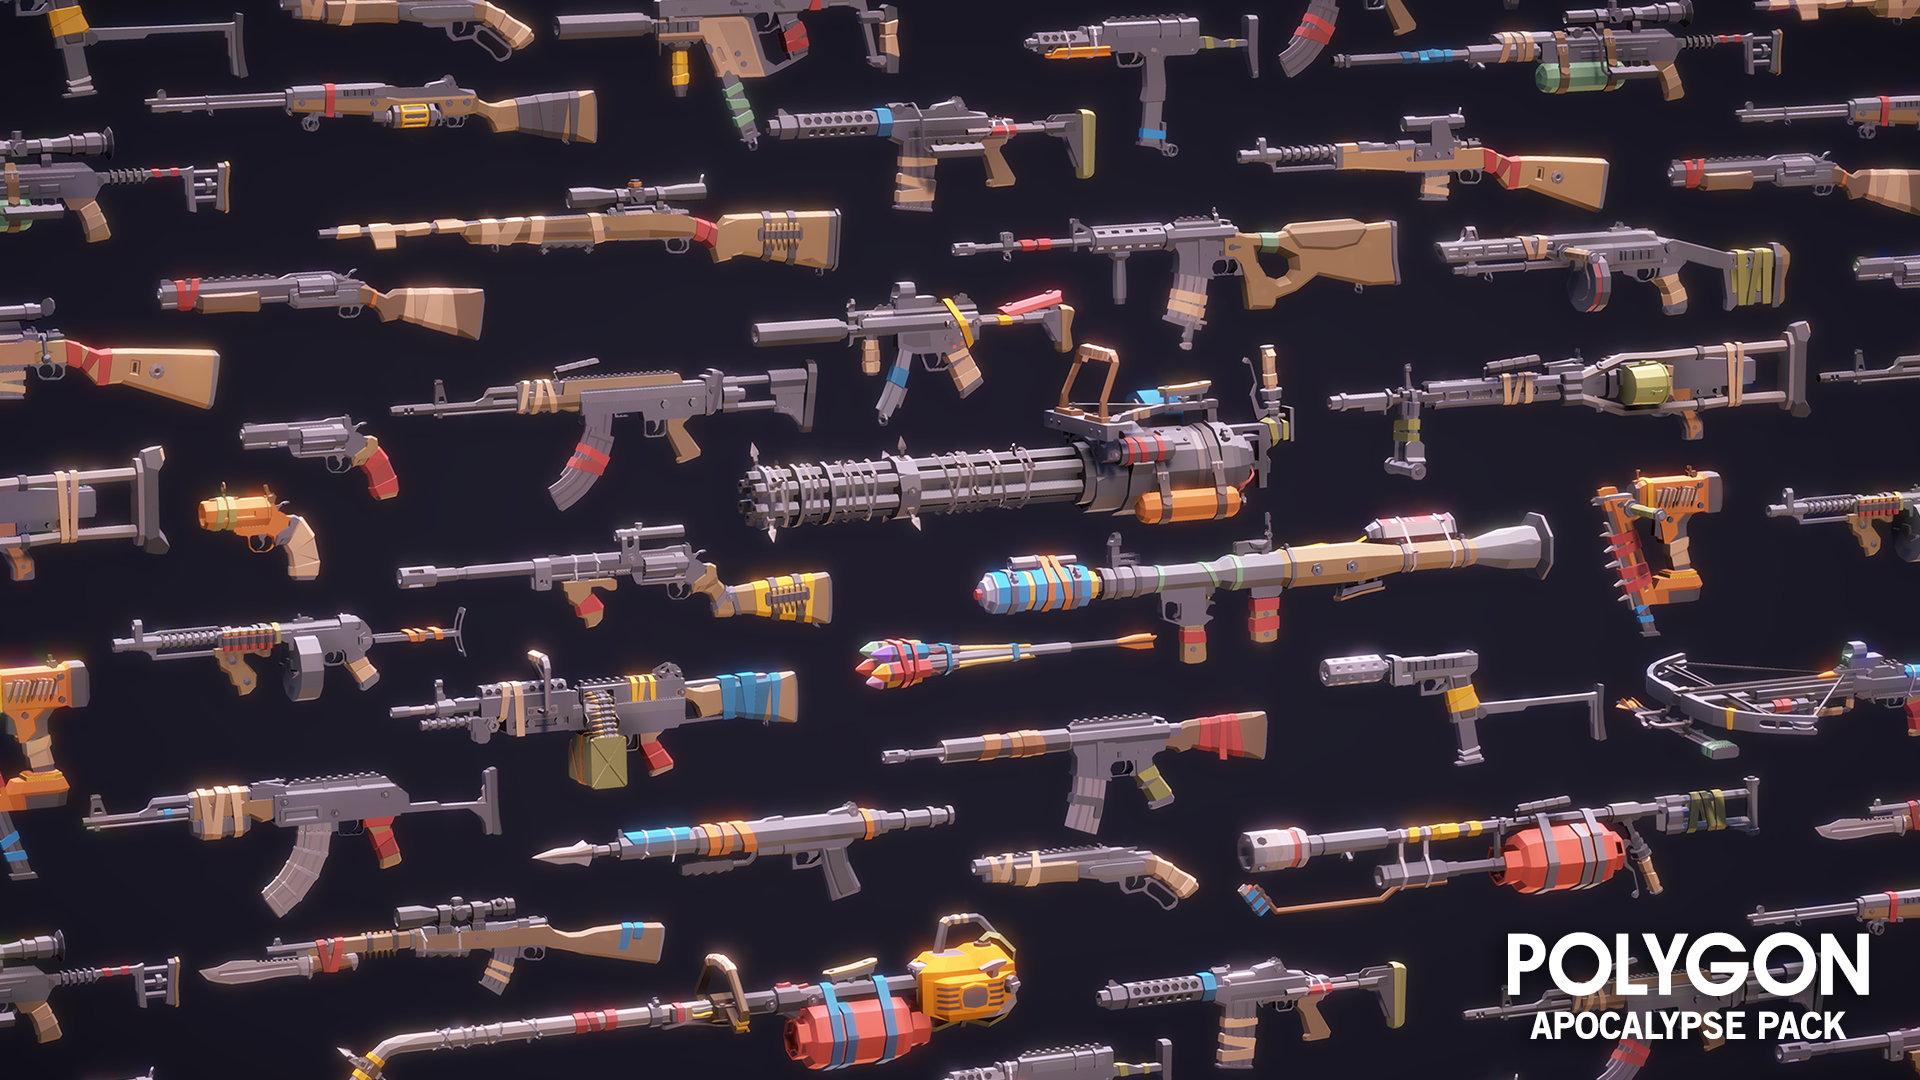 Apocalypse Pack 3D low poly wasteland weapon class assets for game development